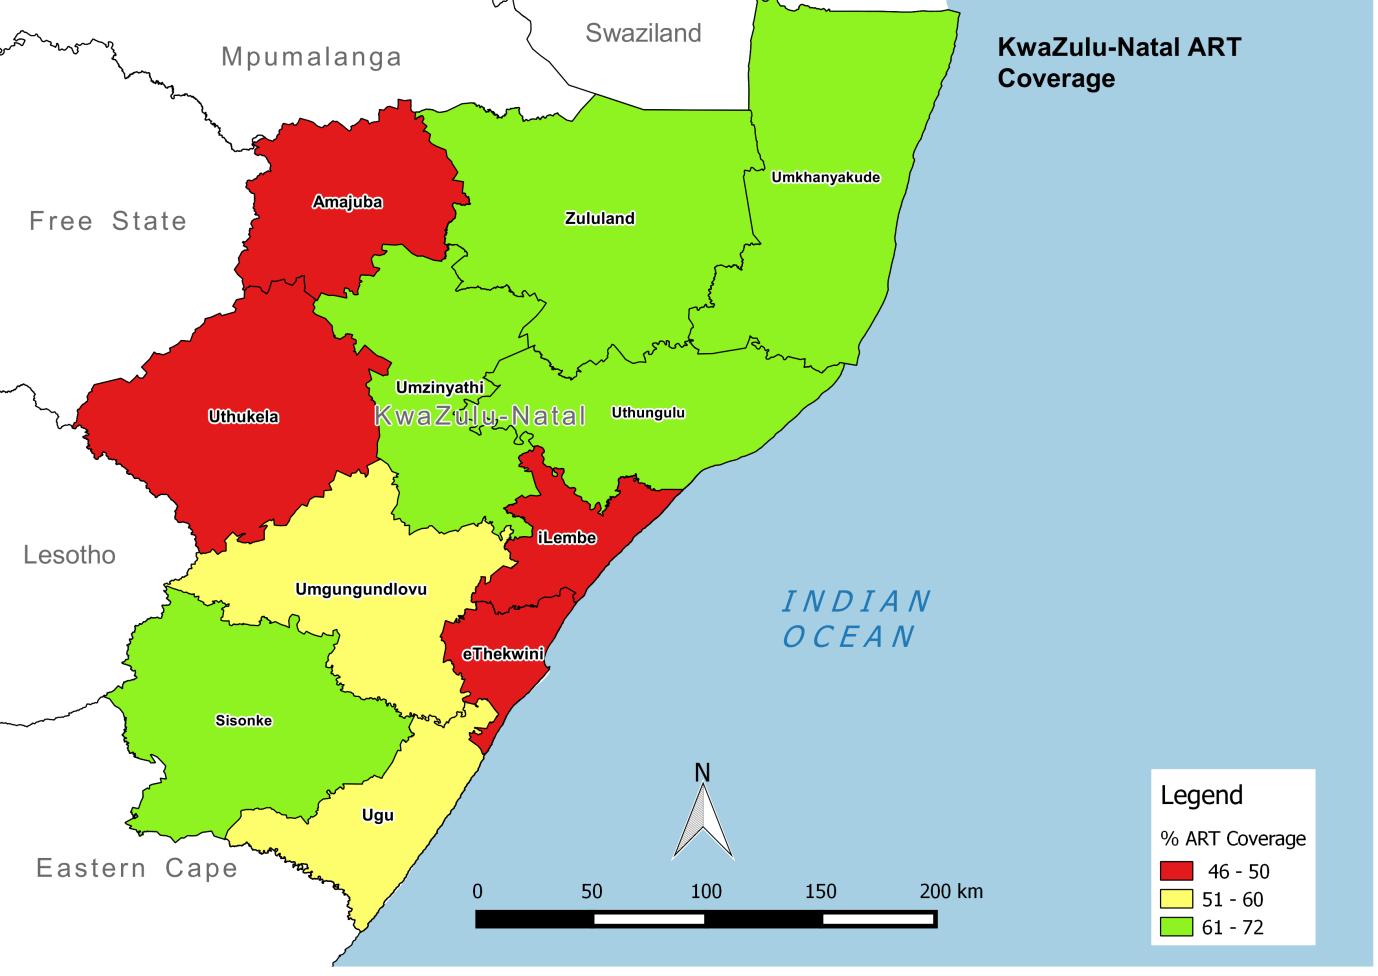 coverage appears to be lower in eThekwini, even though the district has the highest number of PLHIV